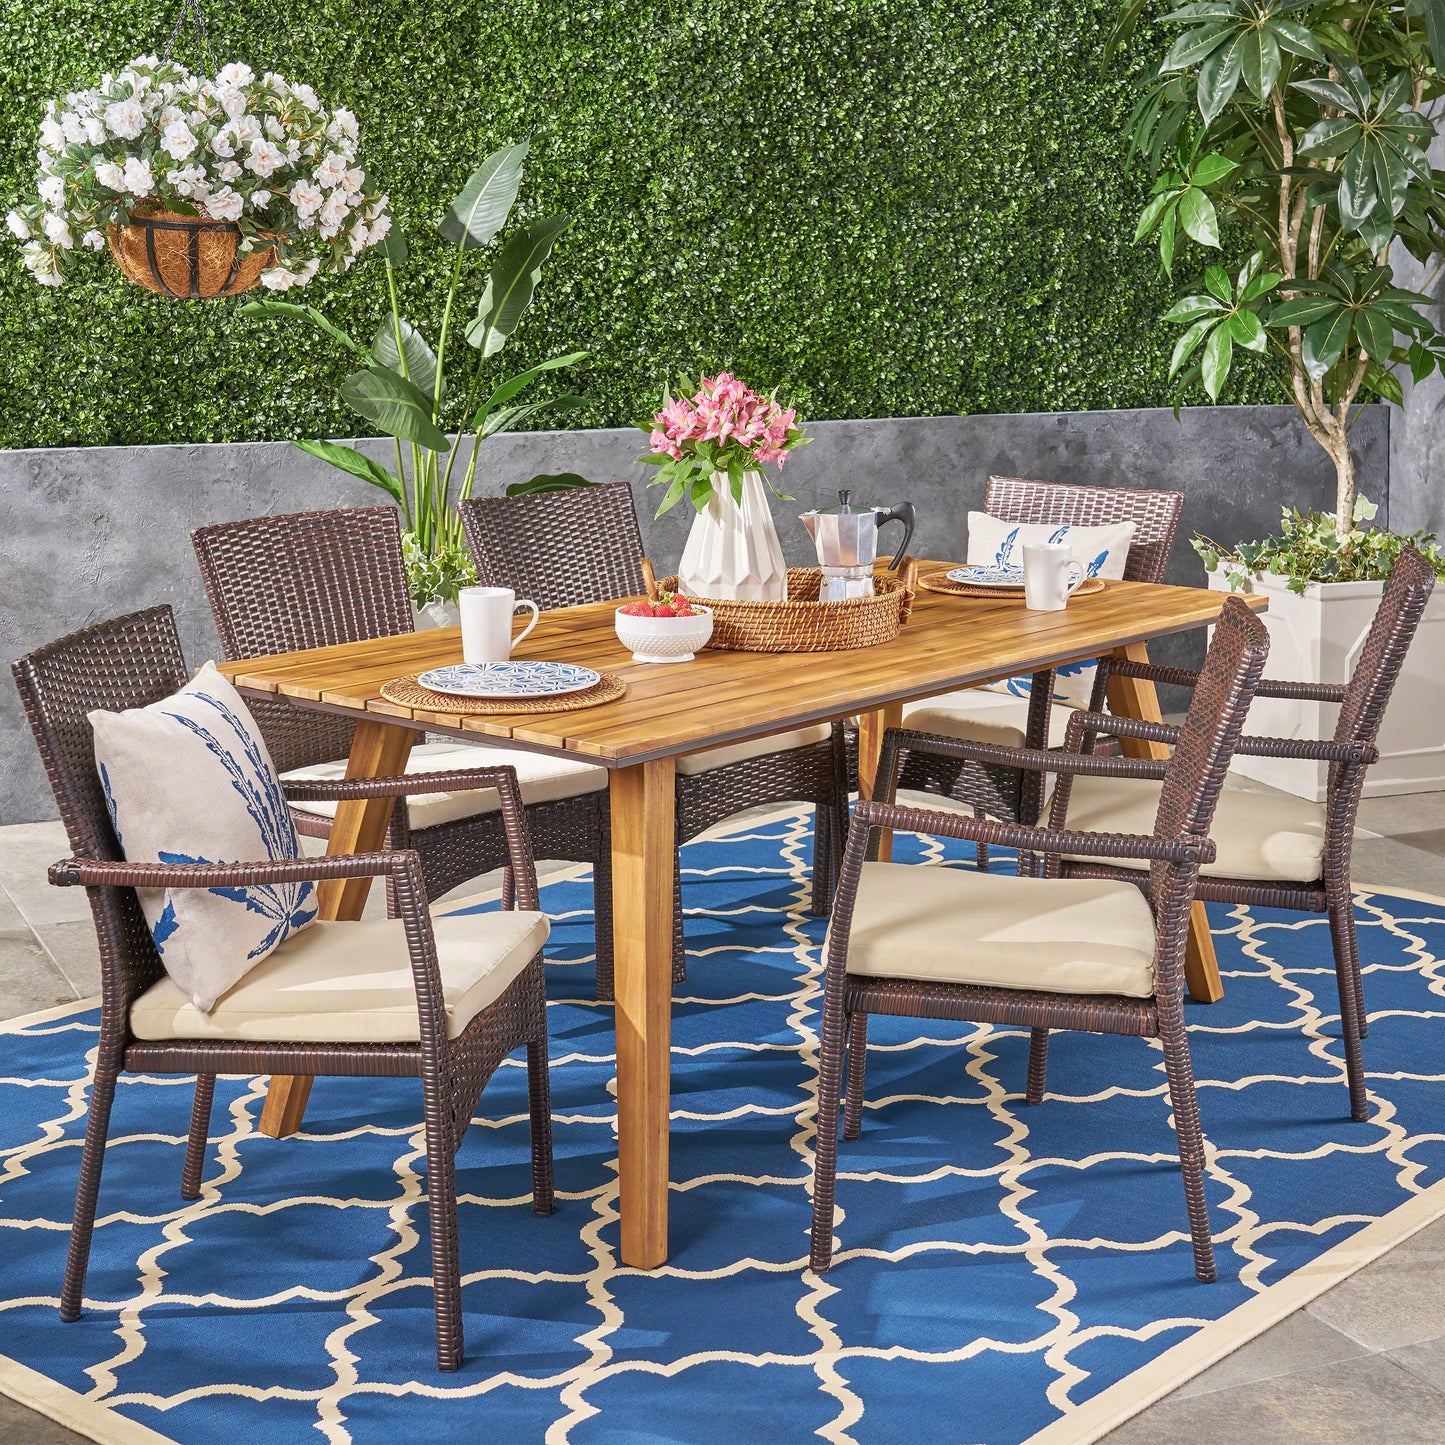 Michaelia Outdoor 7 Piece Acacia Wood Dining Set with Wicker Chairs, Teak and Brown and Cream